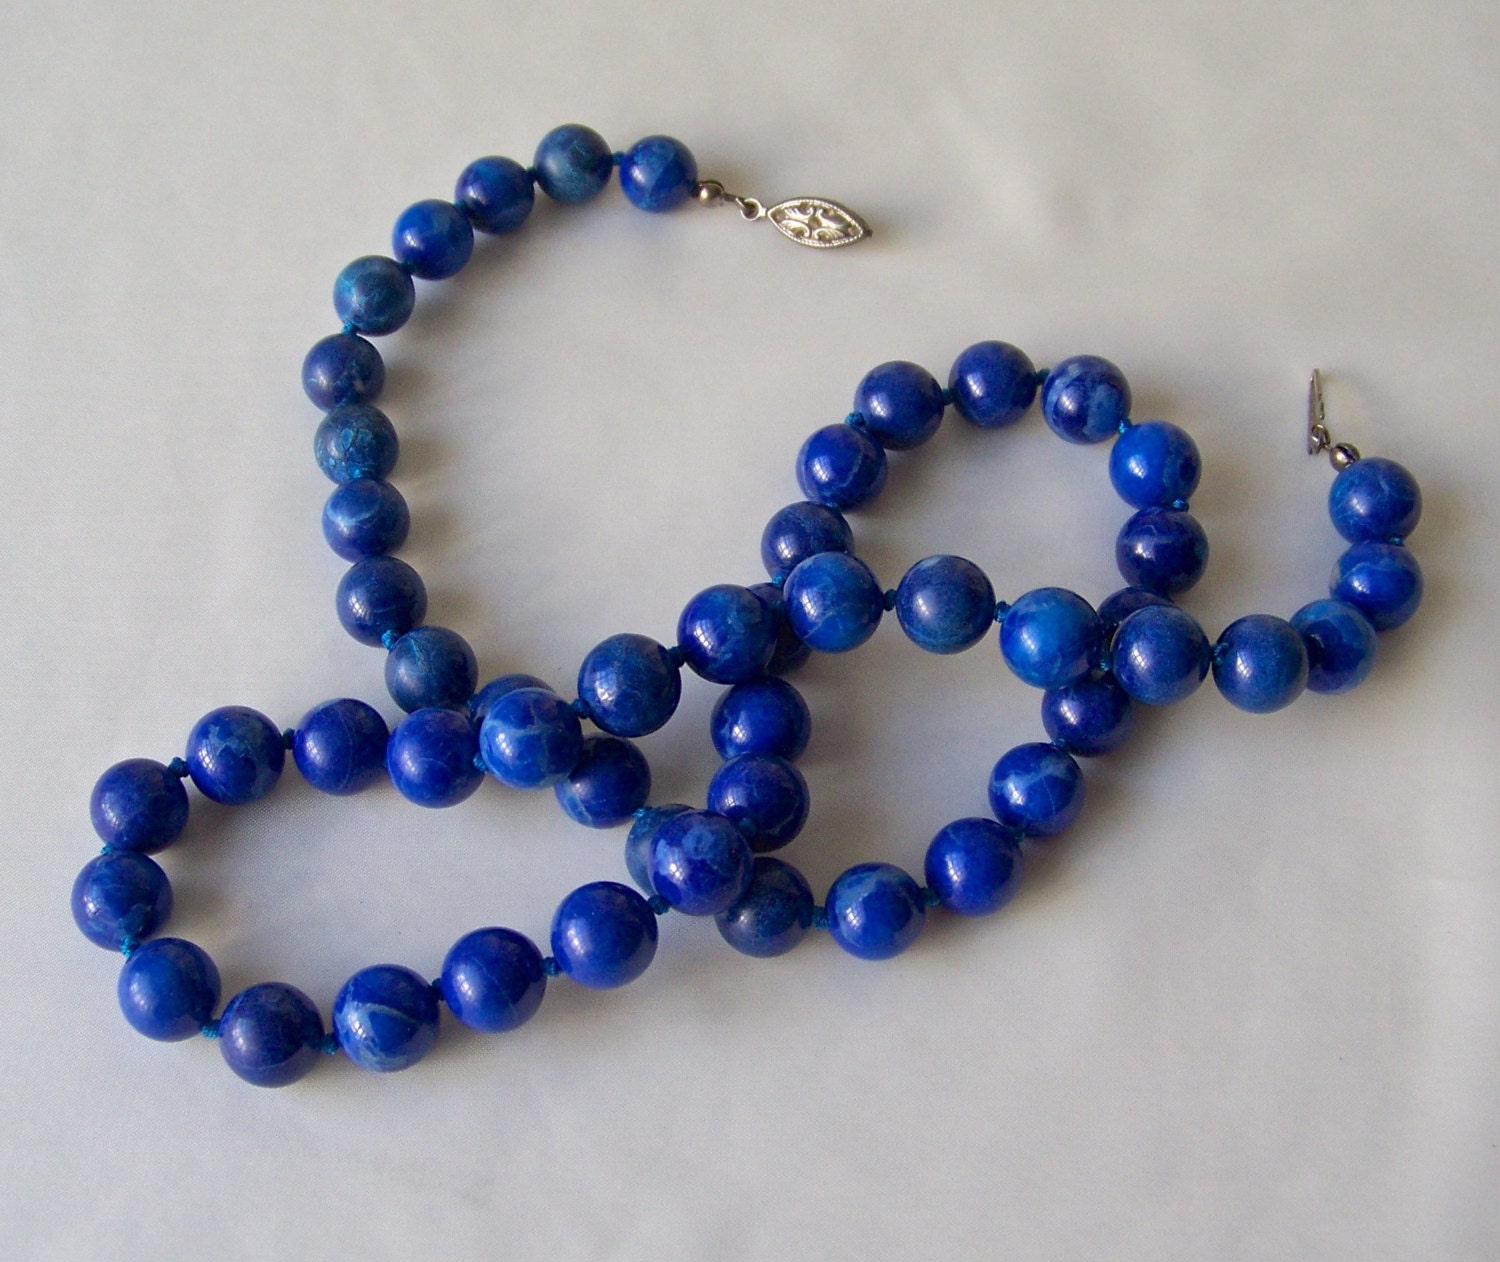 Vintage Blue Jade Necklace Natural Stone Bead by CynthiasAttic